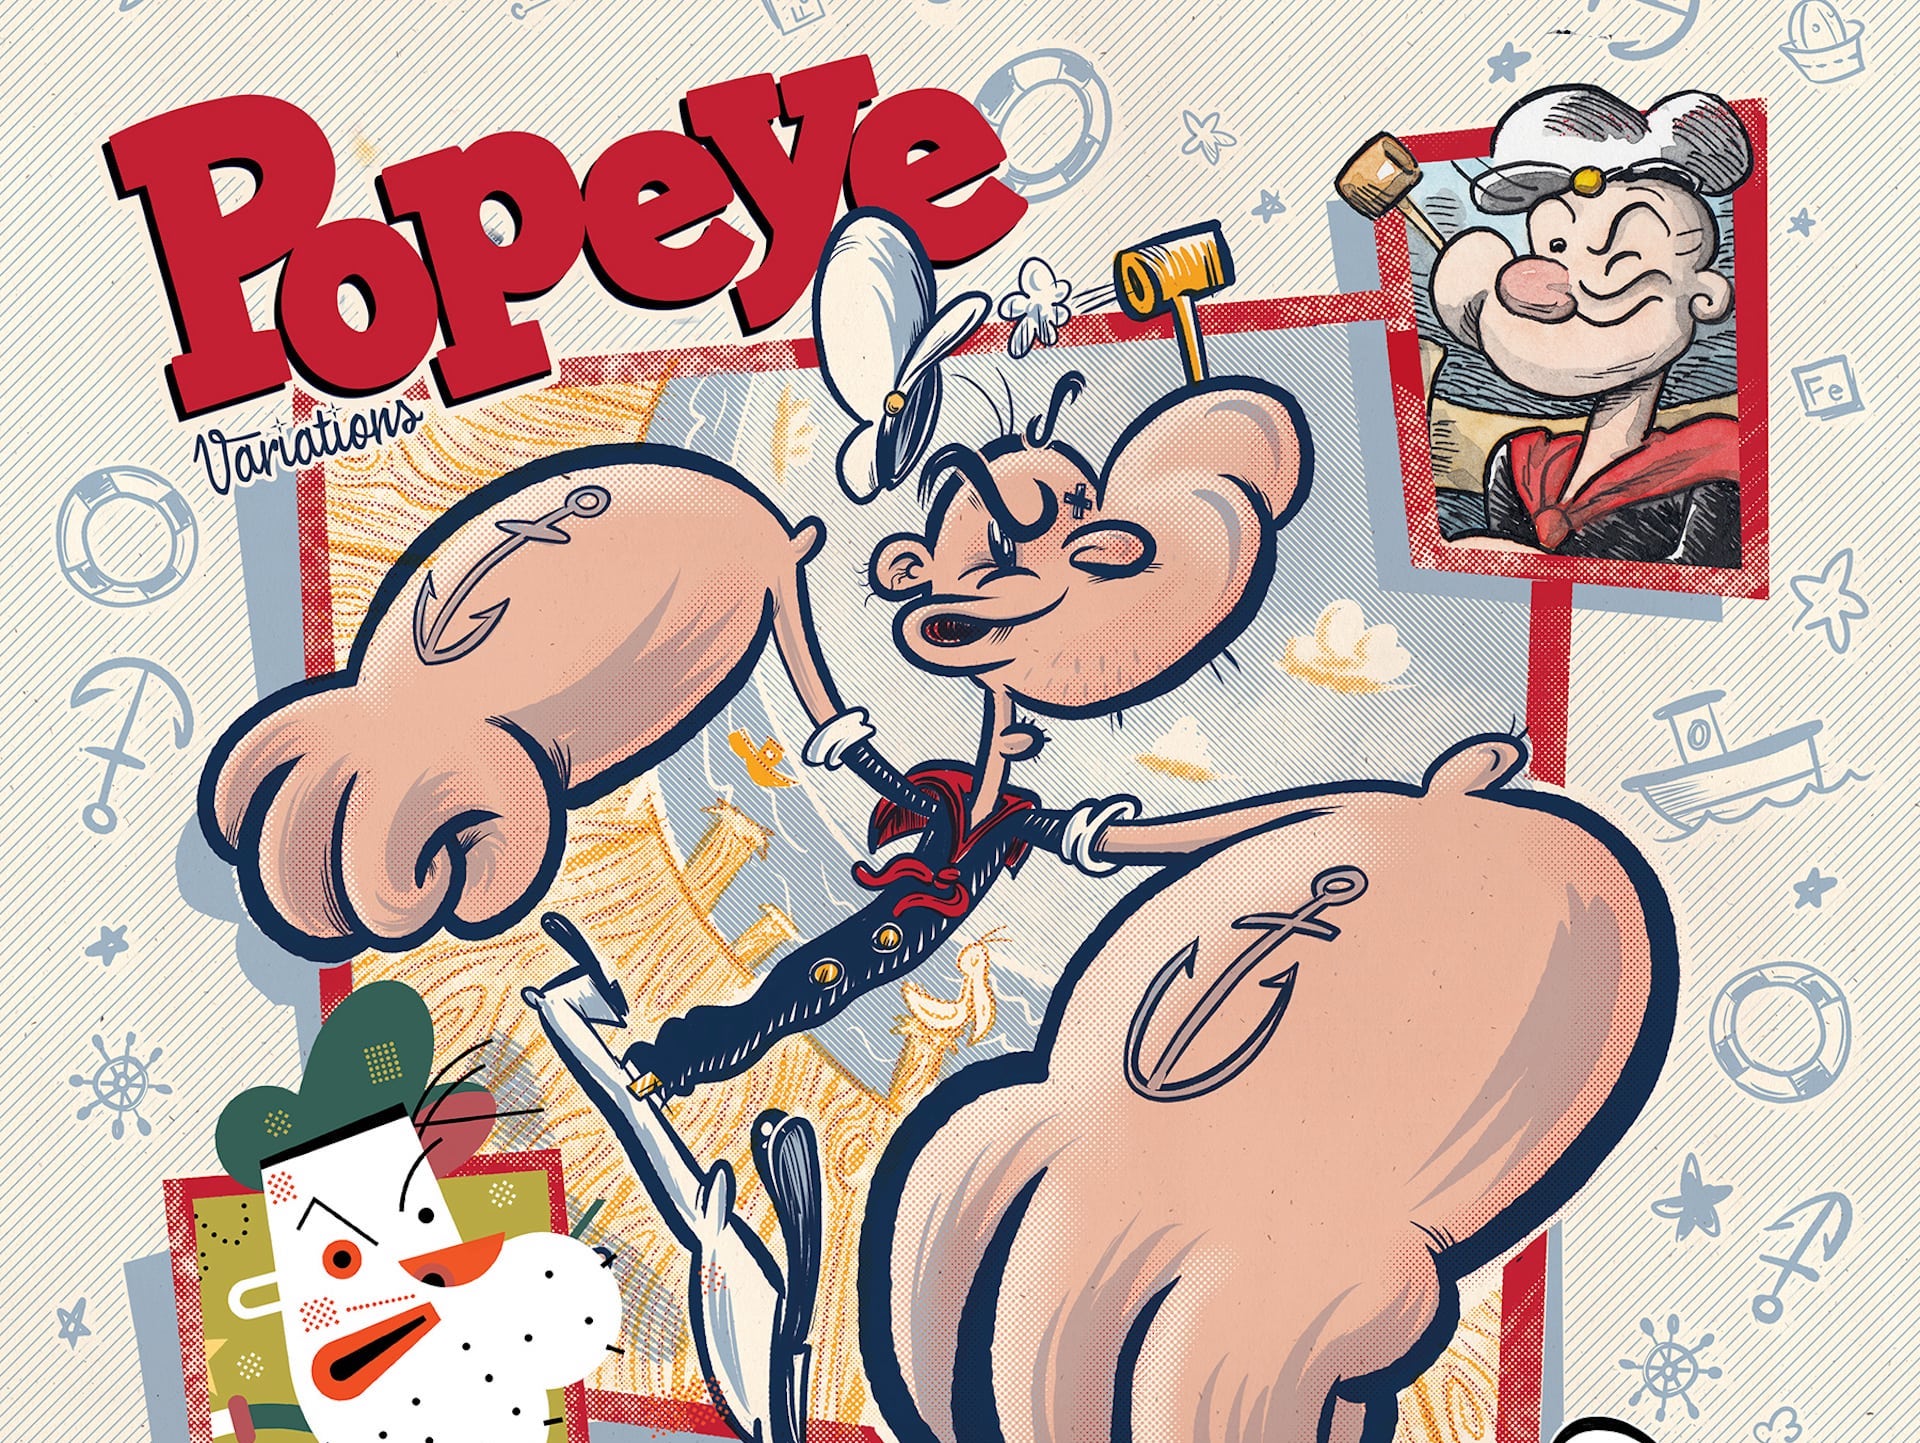 EXCLUSIVE Clover Press Preview: Popeye Variations